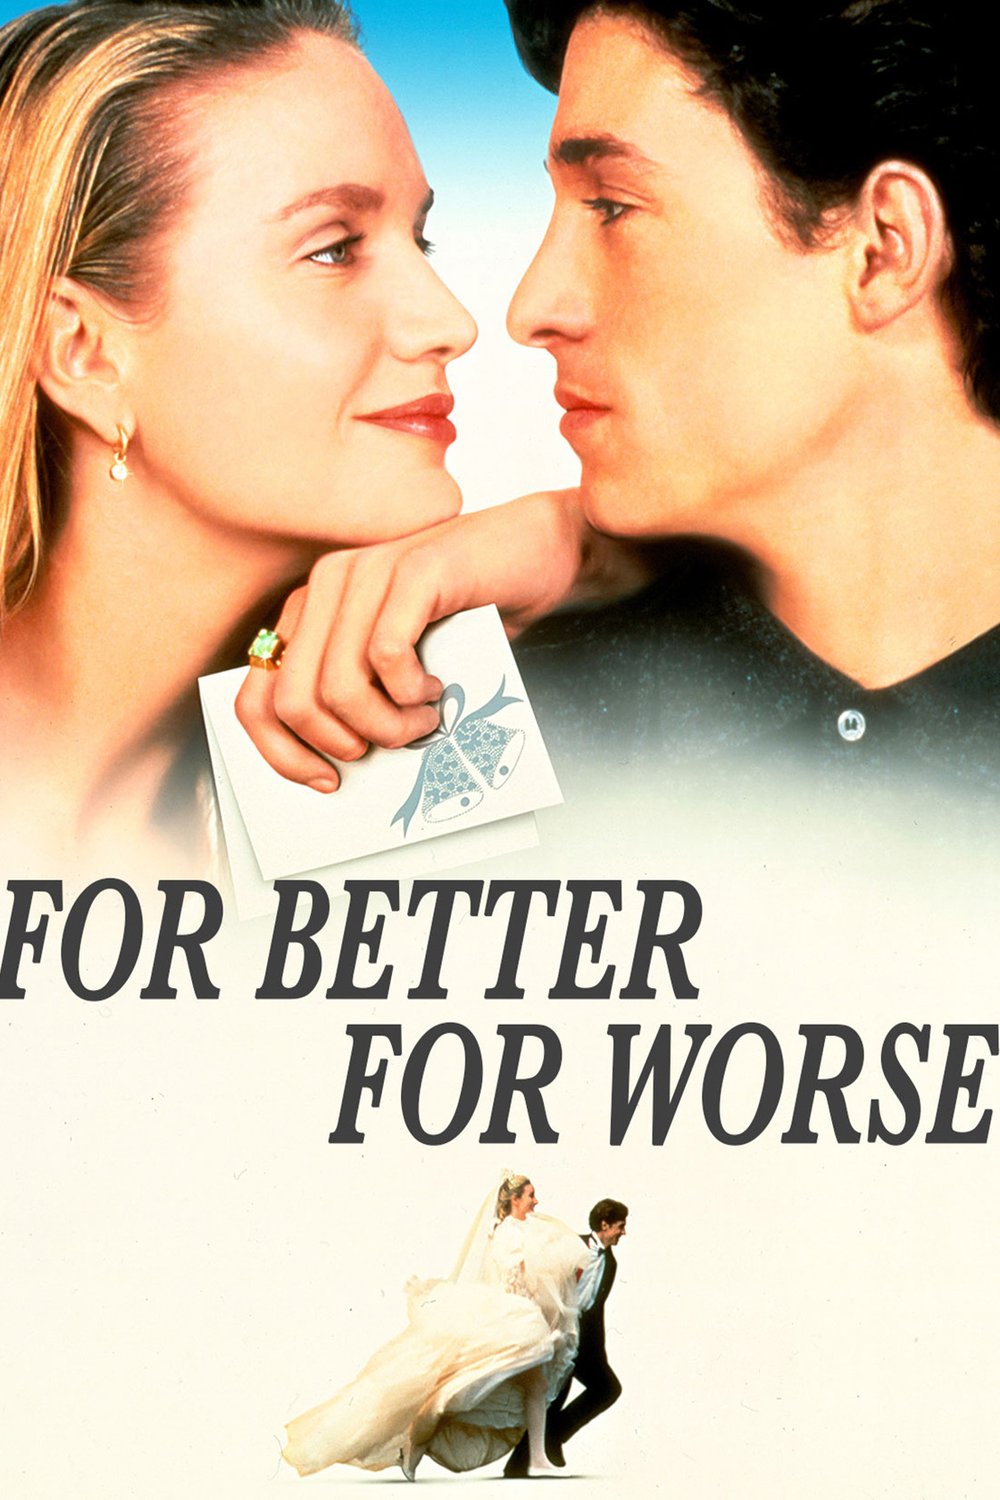 Poster of the movie For Better, For Worse